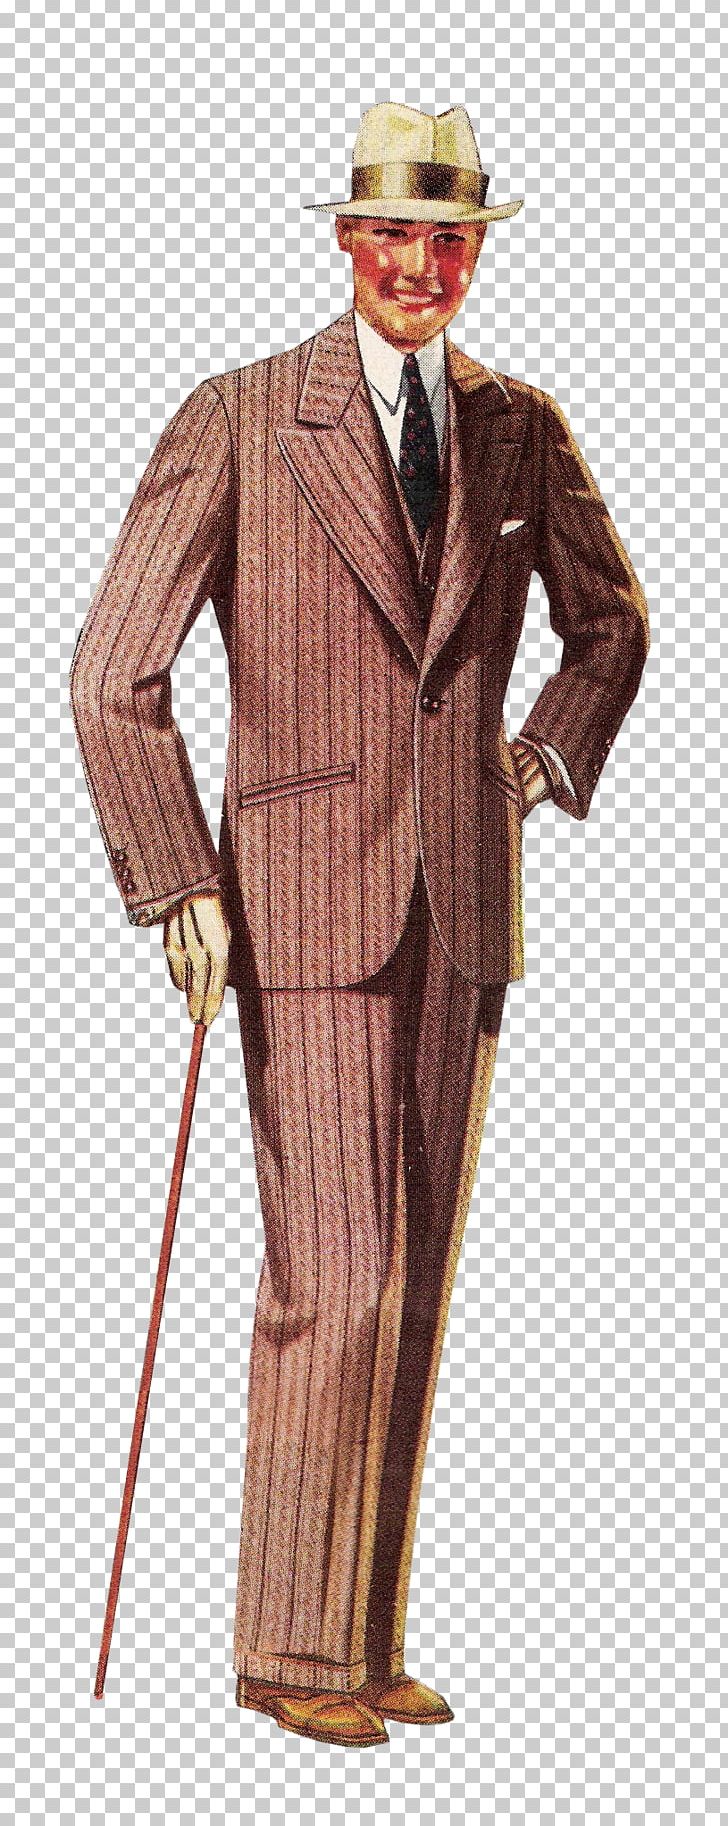 1920s 1940s 1930s Suit Fashion PNG, Clipart, 1920s, 1930s, 1940s, Clothing, Costume Free PNG Download